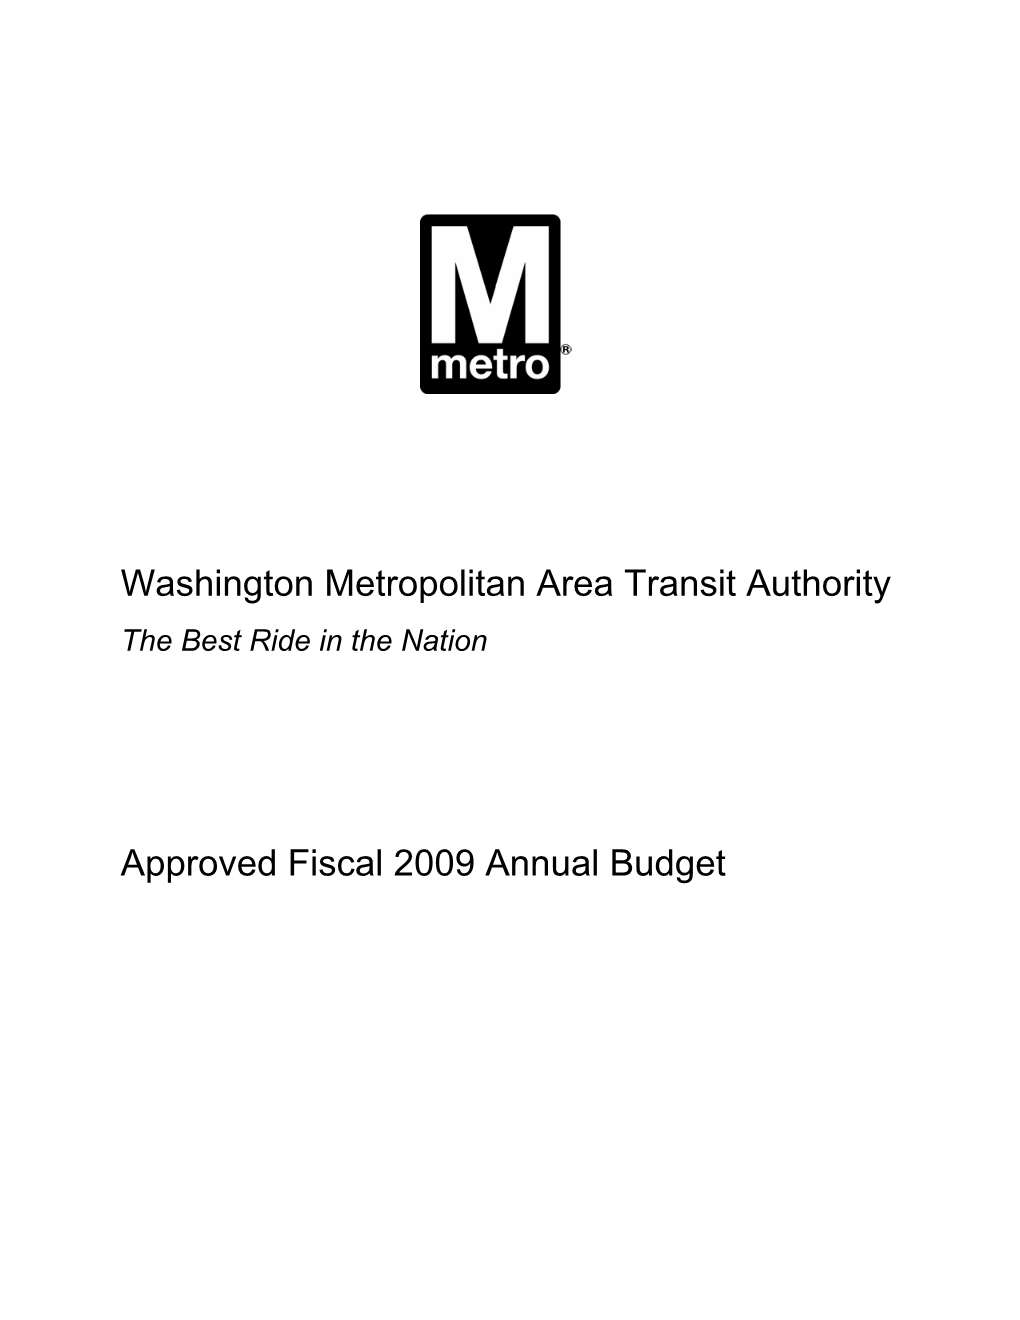 Approved Fiscal 2009 Annual Budget